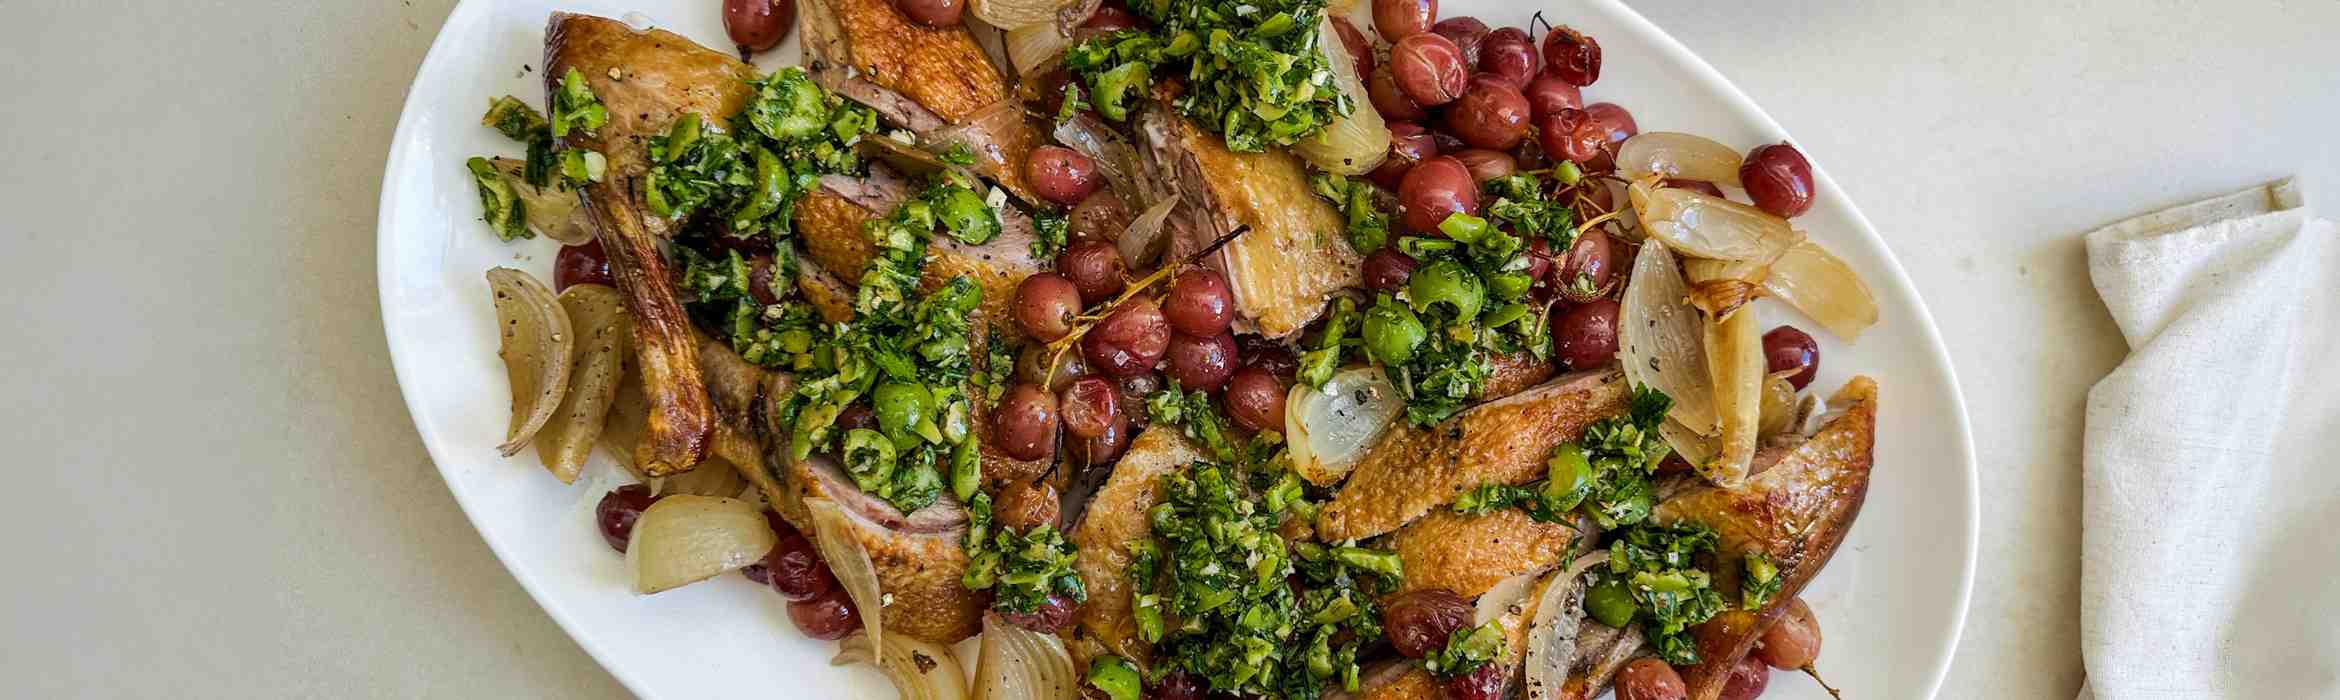 Whole Roast Duck and Duck Fat Potatoes Recipe